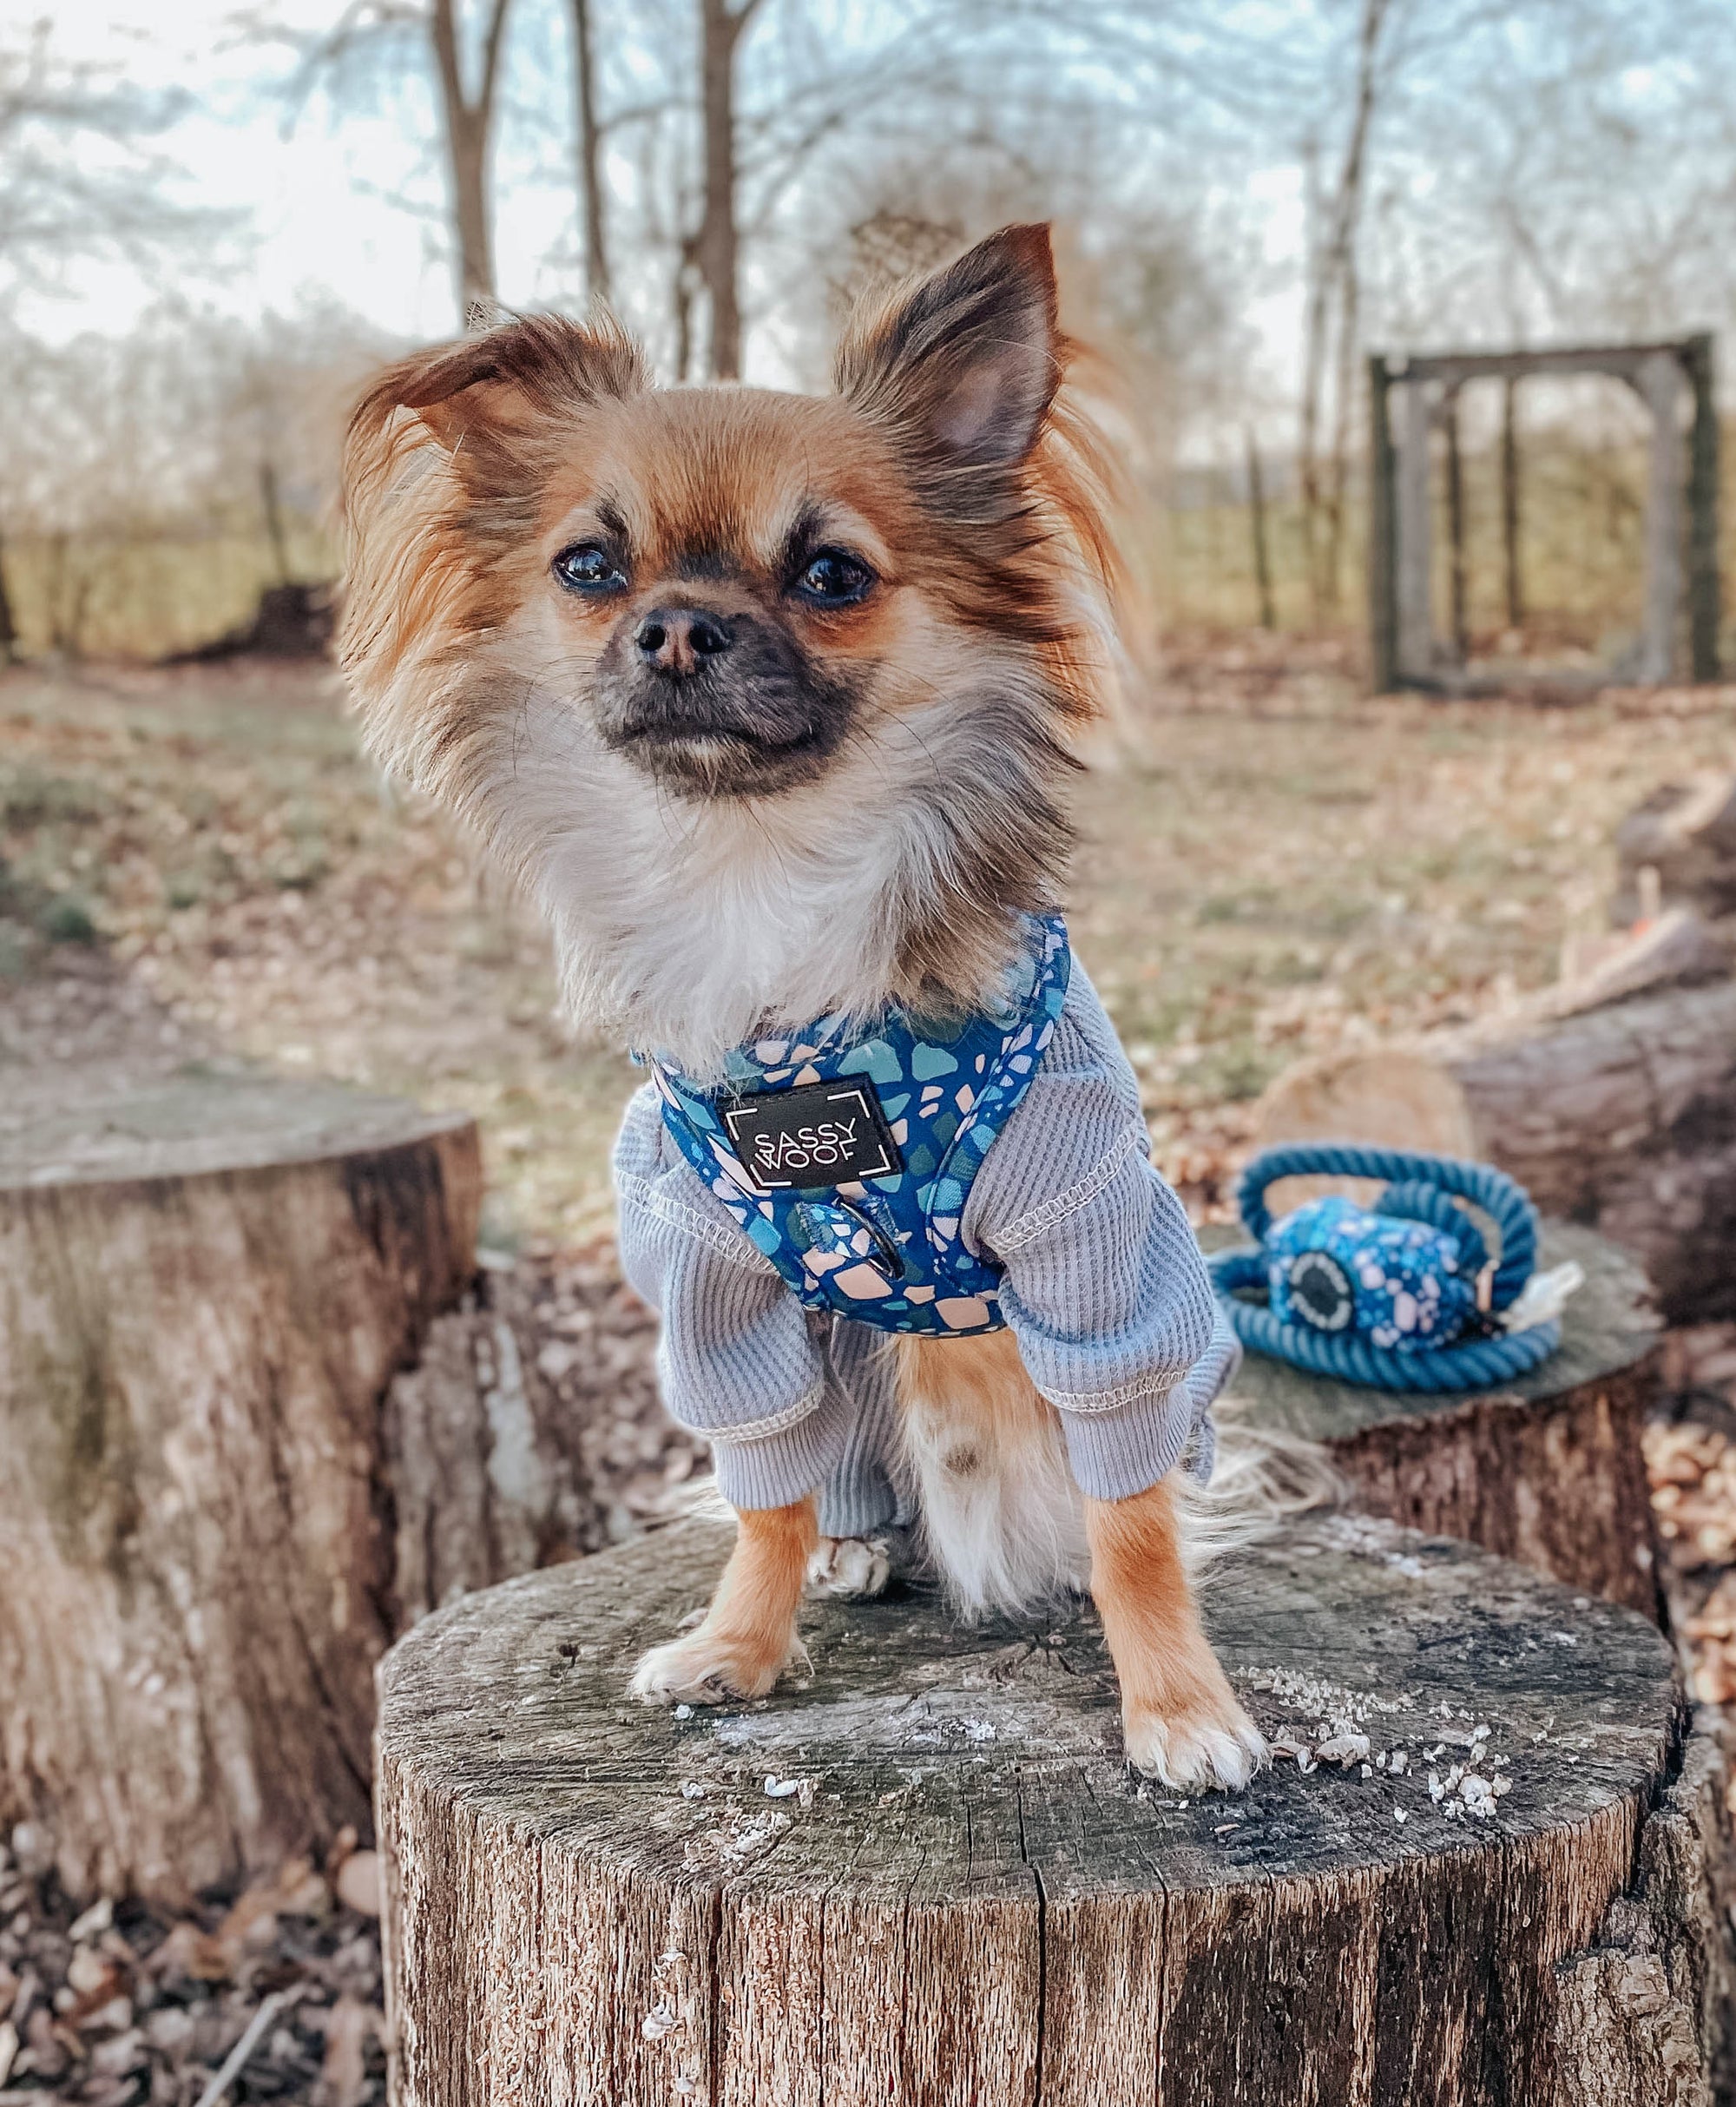 INFLUENCER_CONTENT | @MOCHI_THECHIHUAHUA1